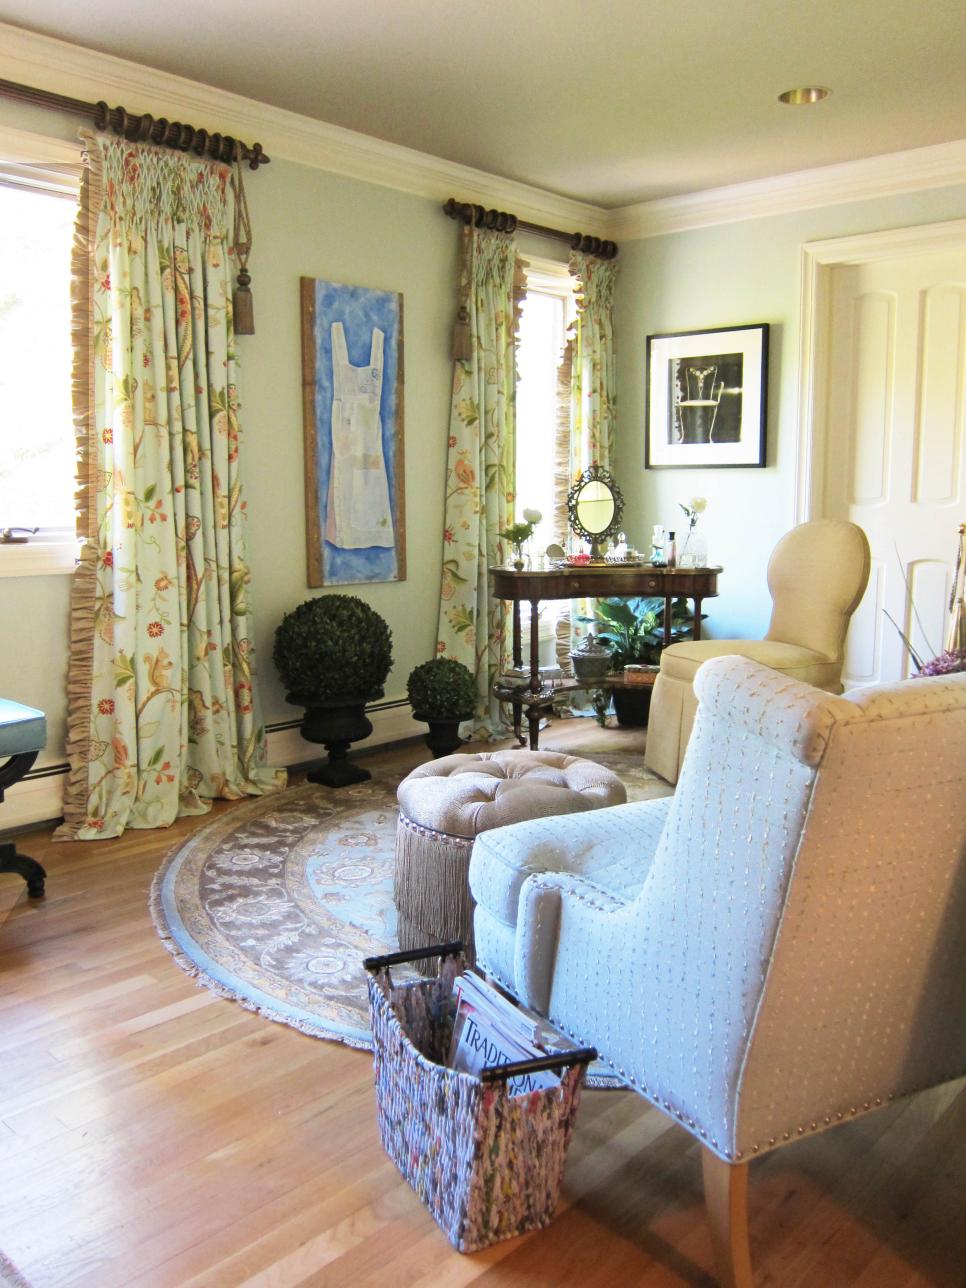 Sitting Room With Makeup Table and Ruffled Curtains